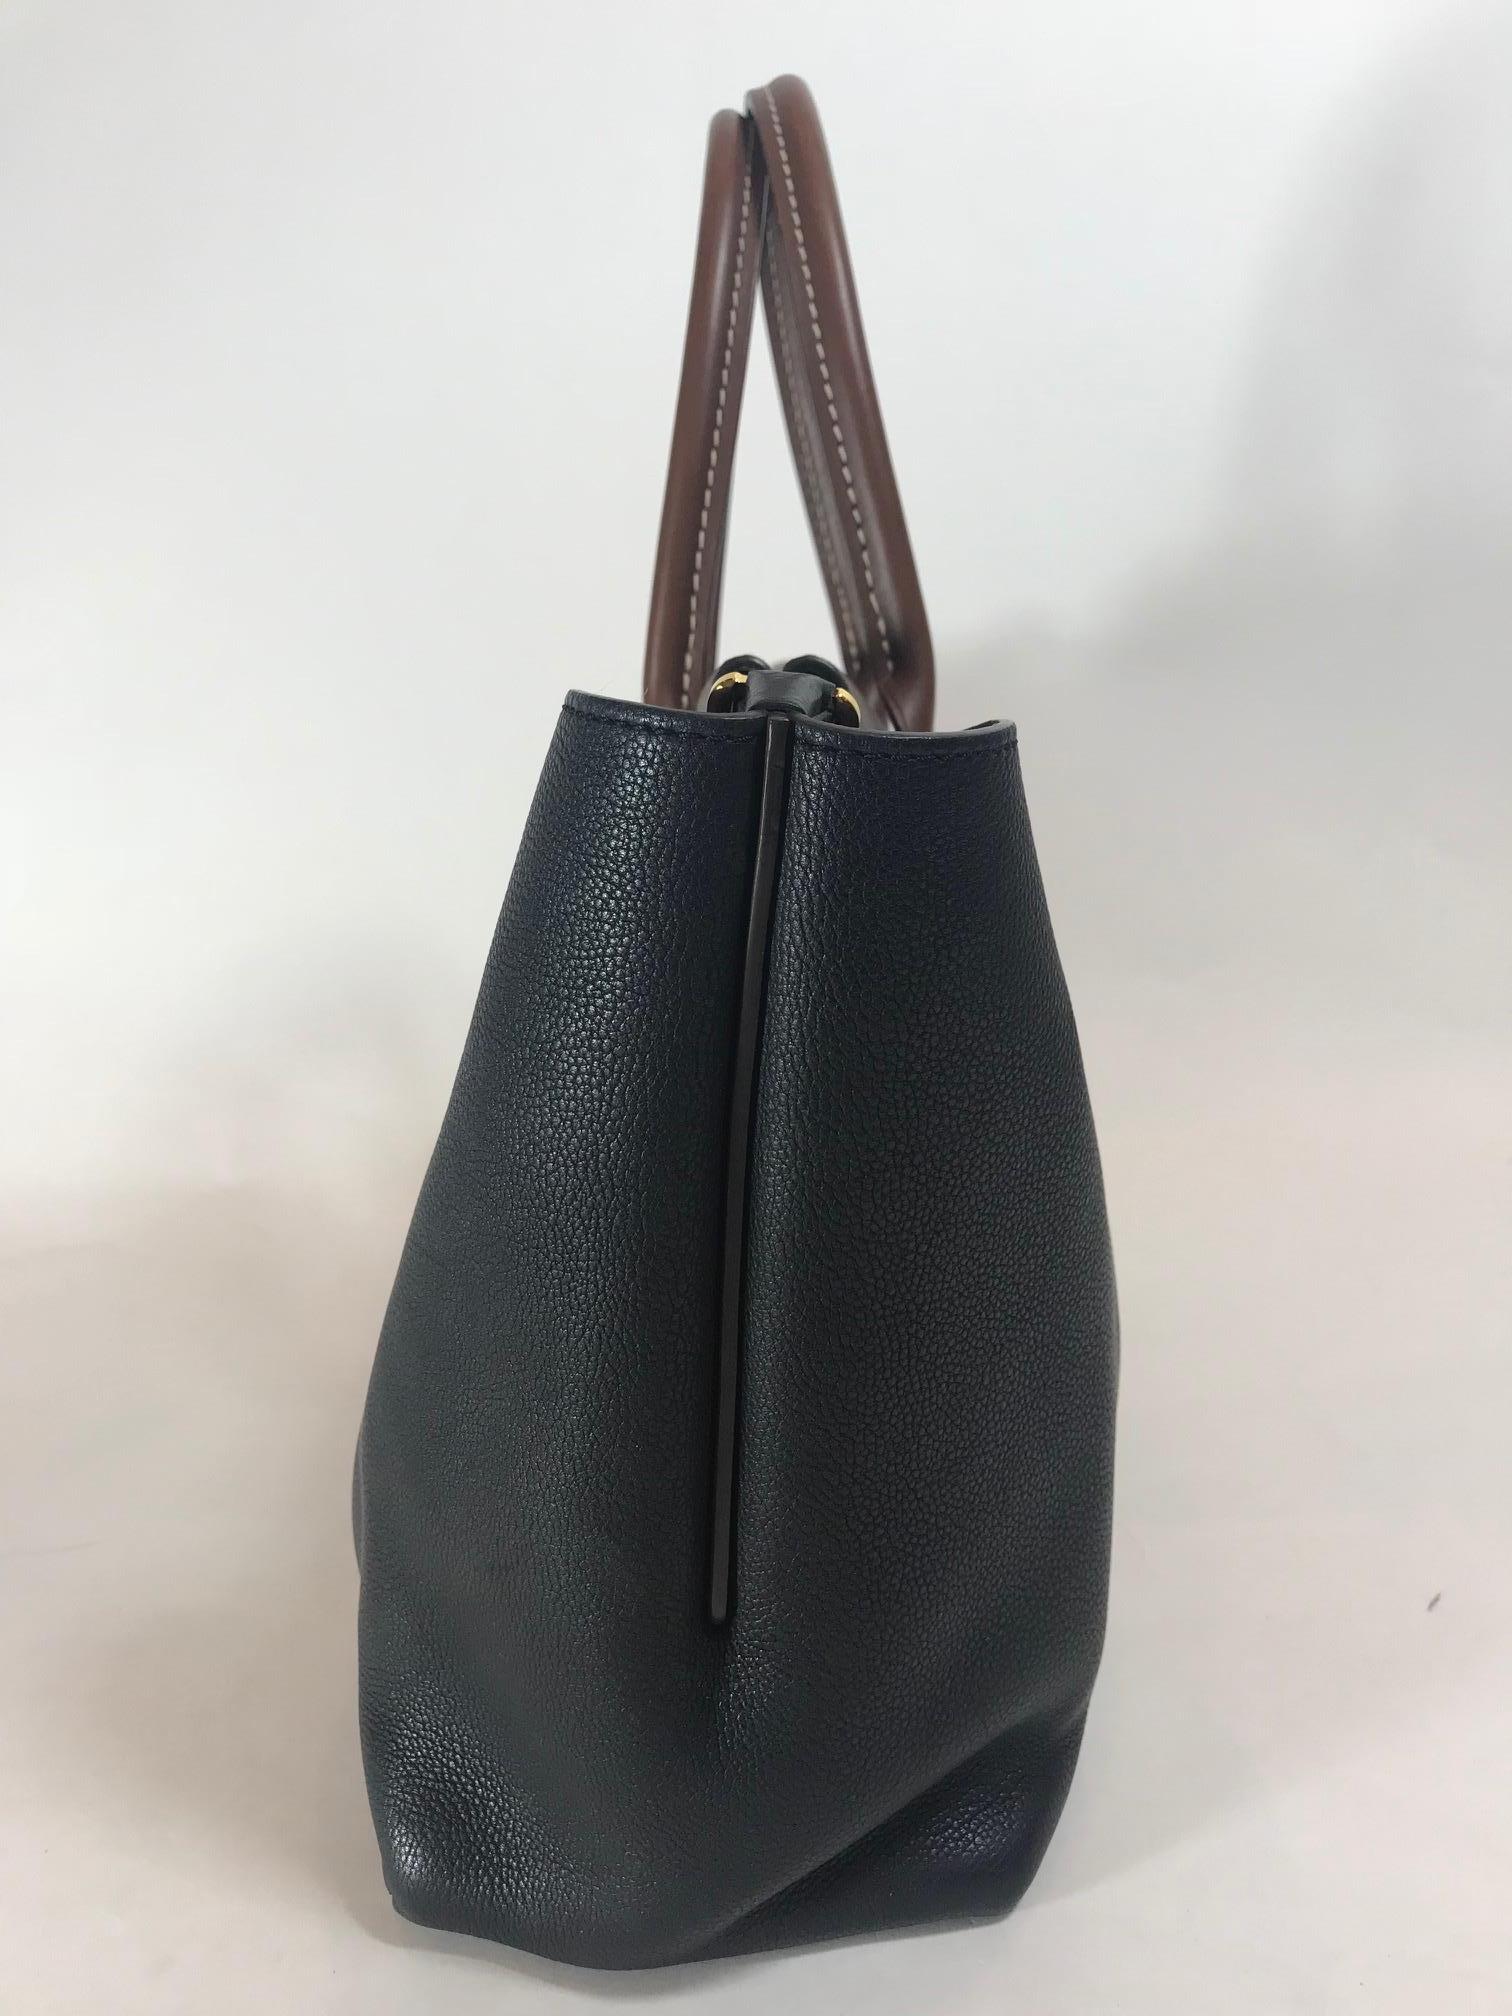 The leather piping trim matches the golden brown rolled leather top handles. The expansive sides of this W-shaped bag can be worn wide or tucked in and snapped inwards. The top is secured with hidden magnet closures, and opens to a light brown suede